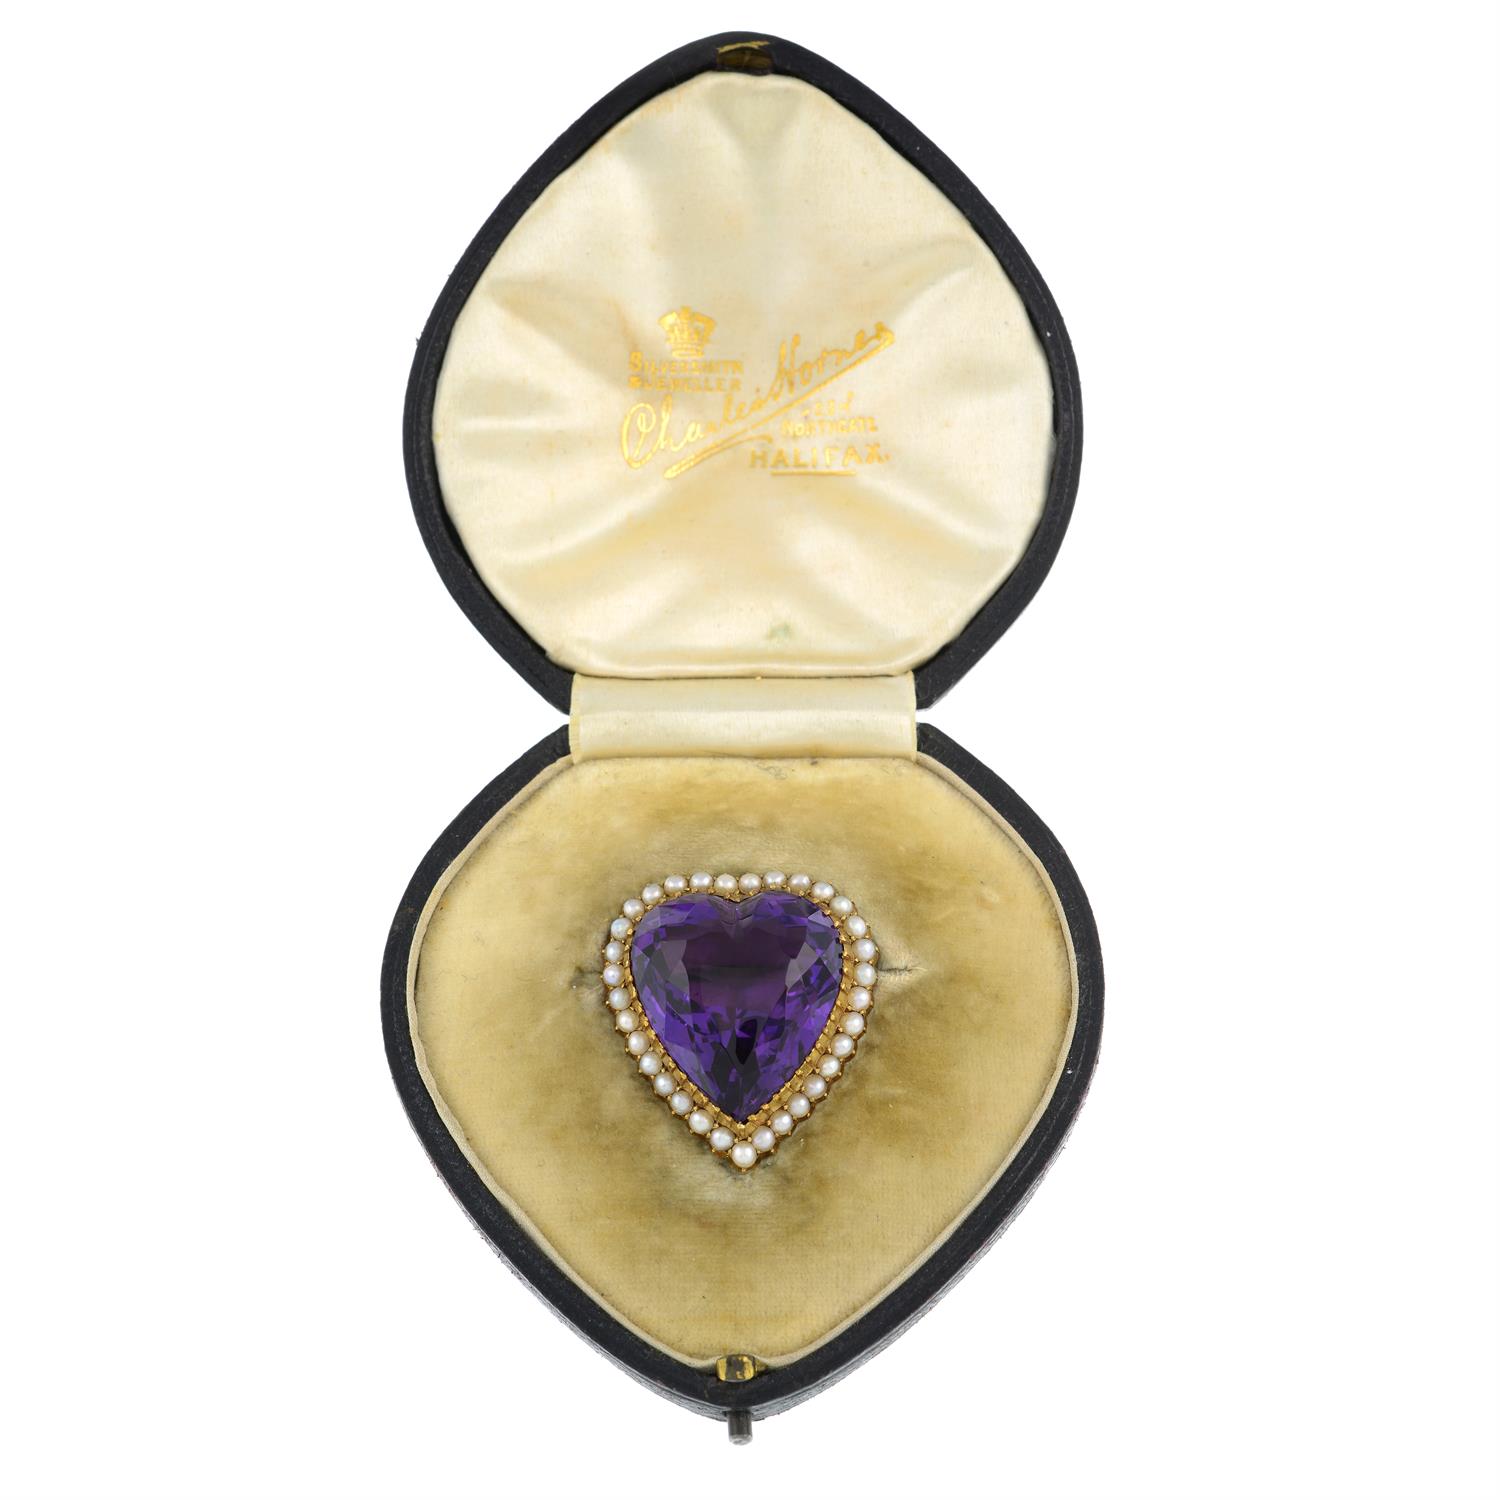 15ct gold amethyst and split pearl heart brooch - Image 4 of 6